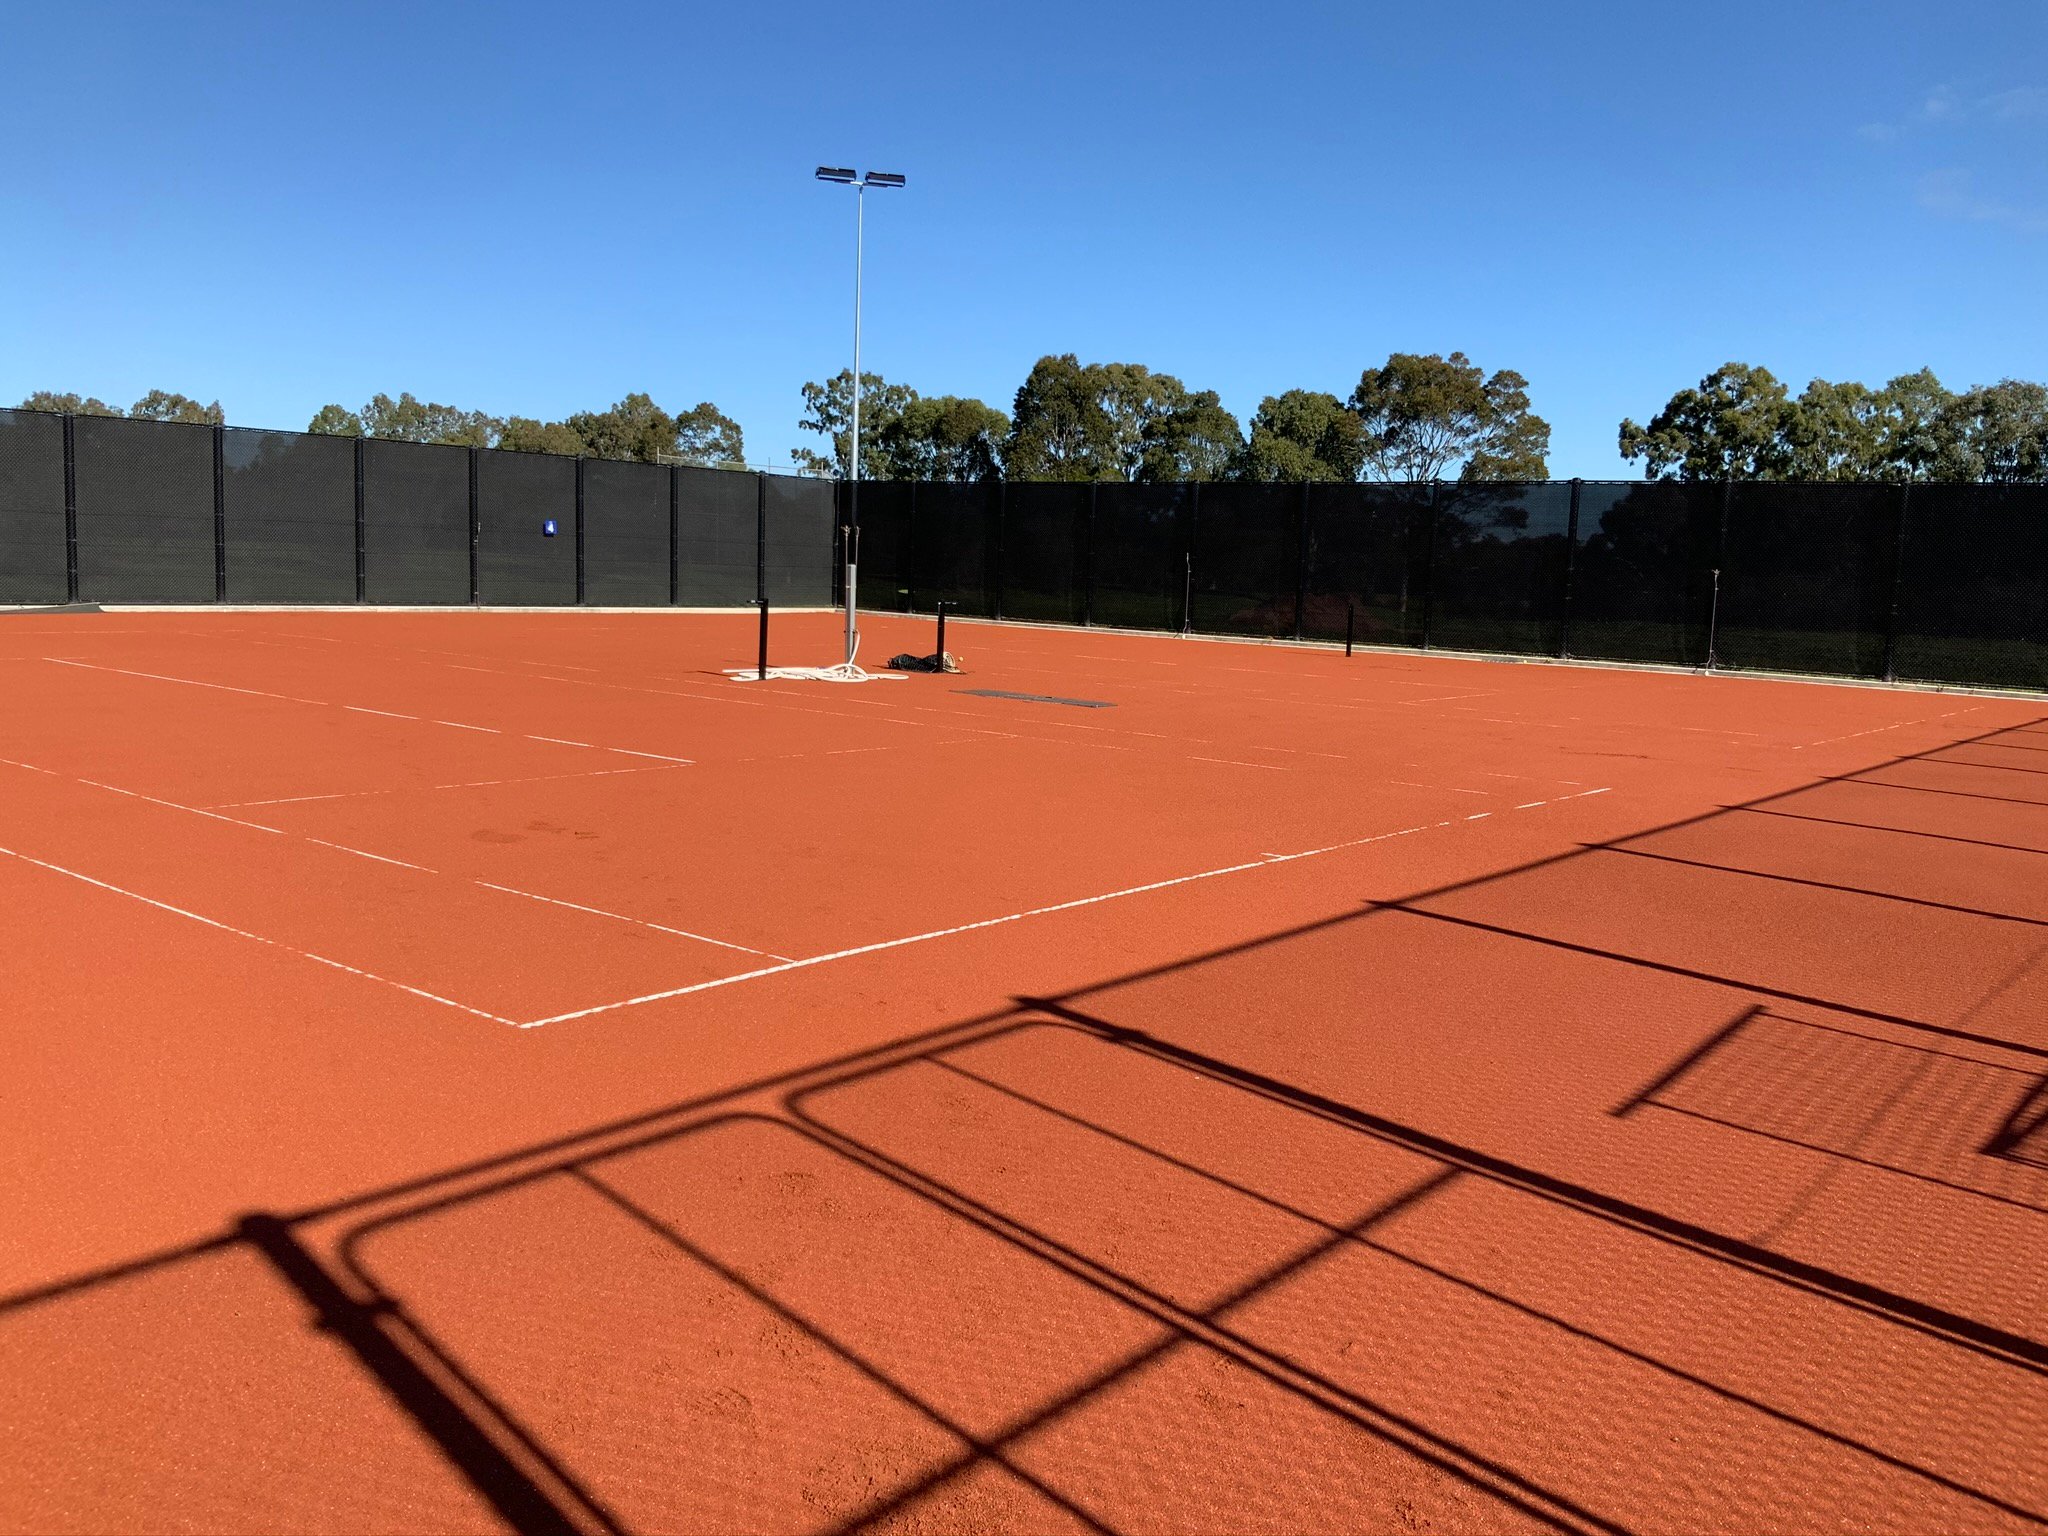 Panoramic view of an outdoor red porous tennis court surface with white line markings